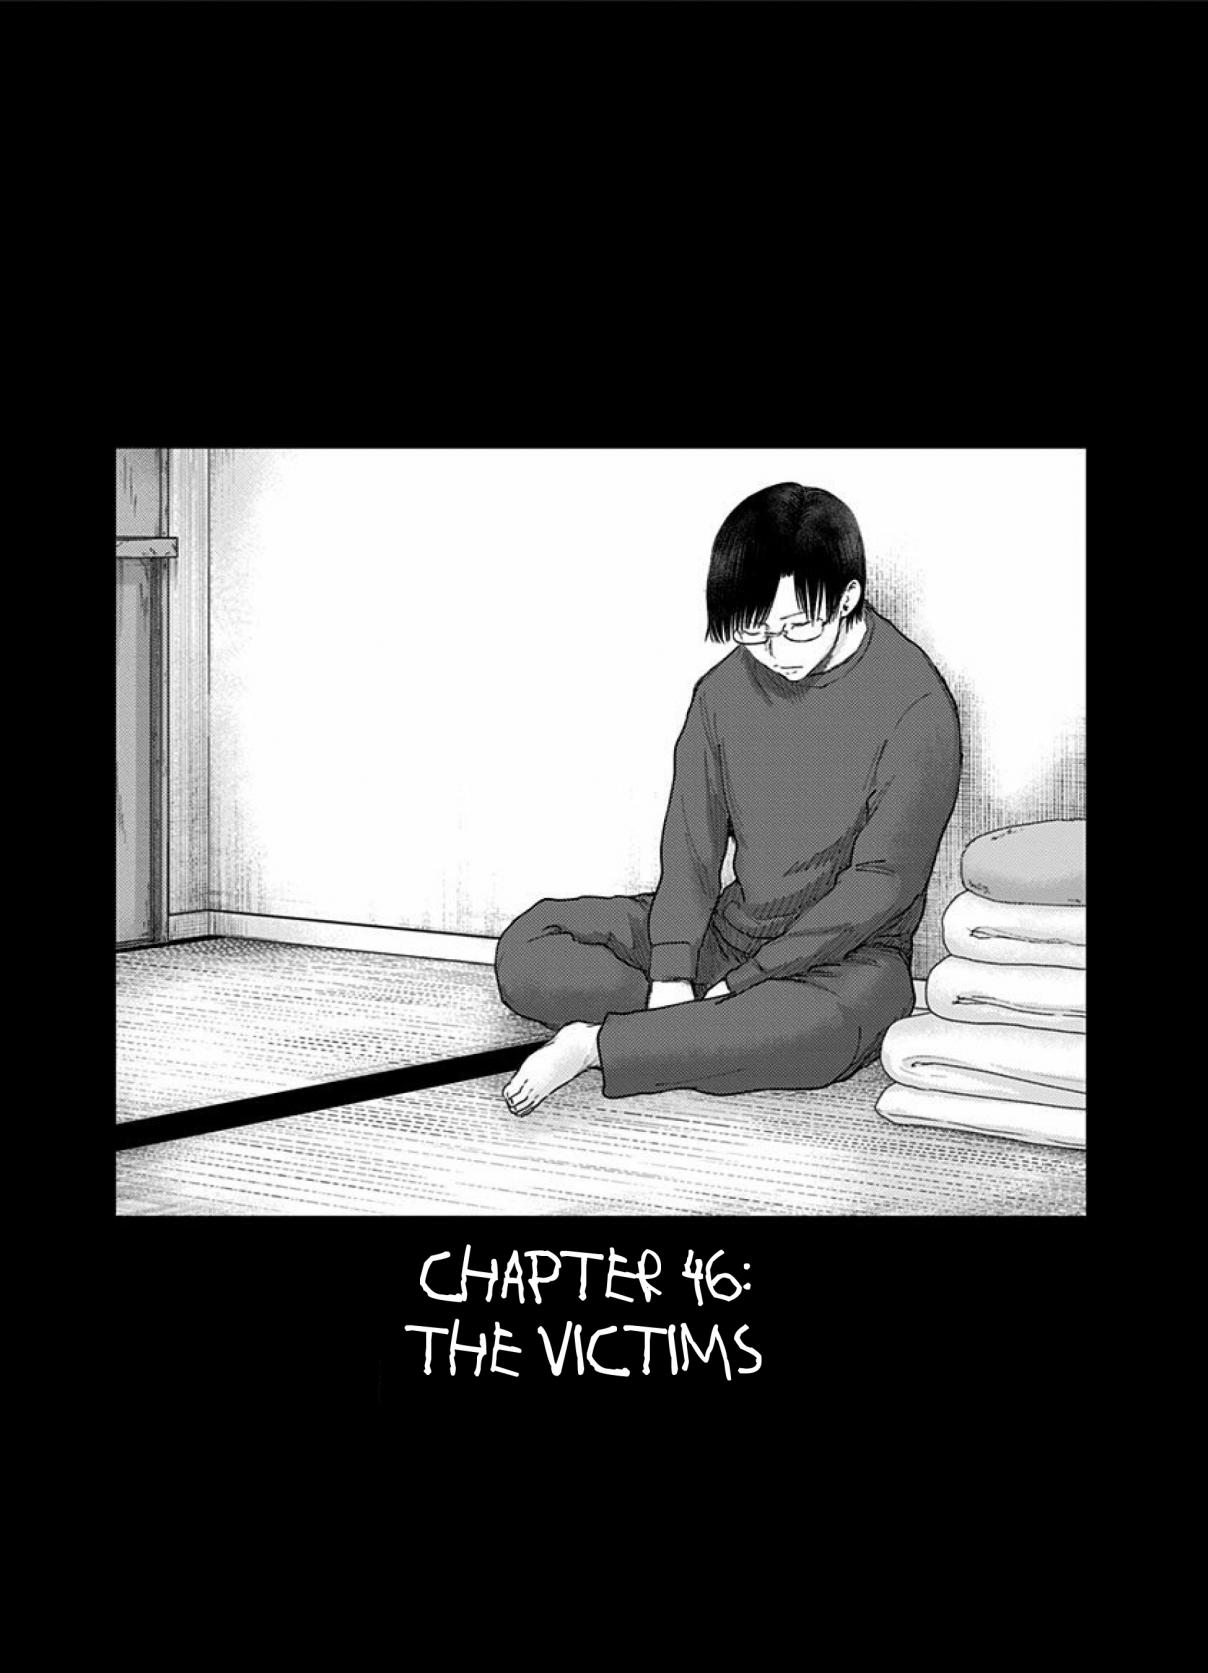 Route End Vol. 7 Ch. 46 The Victims